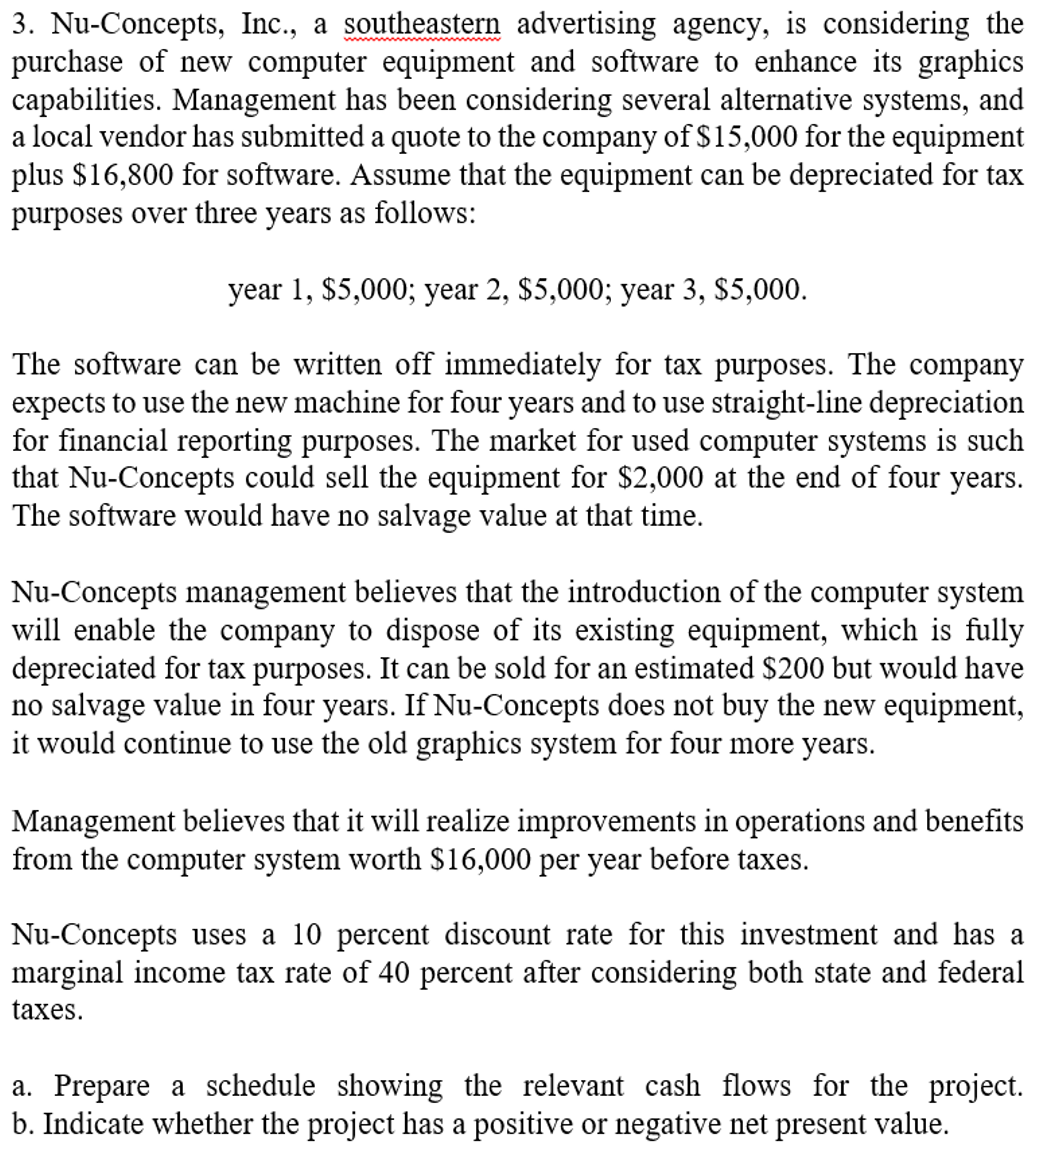 3. Nu-Concepts, Inc., a southeastern advertising agency, is considering the
purchase of new computer equipment and software to enhance its graphics
capabilities. Management has been considering several alternative systems, and
a local vendor has submitted a quote to the company of $15,000 for the equipment
plus $16,800 for software. Assume that the equipment can be depreciated for tax
purposes over three years as follows:
year 1, $5,000; year 2, $5,000; year 3, $5,000.
The software can be written off immediately for tax purposes. The company
expects to use the new machine for four years and to use straight-line depreciation
for financial reporting purposes. The market for used computer systems is such
that Nu-Concepts could sell the equipment for $2,000 at the end of four years.
The software would have no salvage value at that time.
Nu-Concepts management believes that the introduction of the computer system
will enable the company to dispose of its existing equipment, which is fully
depreciated for tax purposes. It can be sold for an estimated $200 but would have
no salvage value in four years. If Nu-Concepts does not buy the new equipment,
it would continue to use the old graphics system for four more years.
Management believes that it will realize improvements in operations and benefits
from the computer system worth $16,000 per year before taxes.
Nu-Concepts uses a 10 percent discount rate for this investment and has a
marginal income tax rate of 40 percent after considering both state and federal
taxes.
a. Prepare a schedule showing the relevant cash flows for the project.
b. Indicate whether the project has a positive or negative net present value.